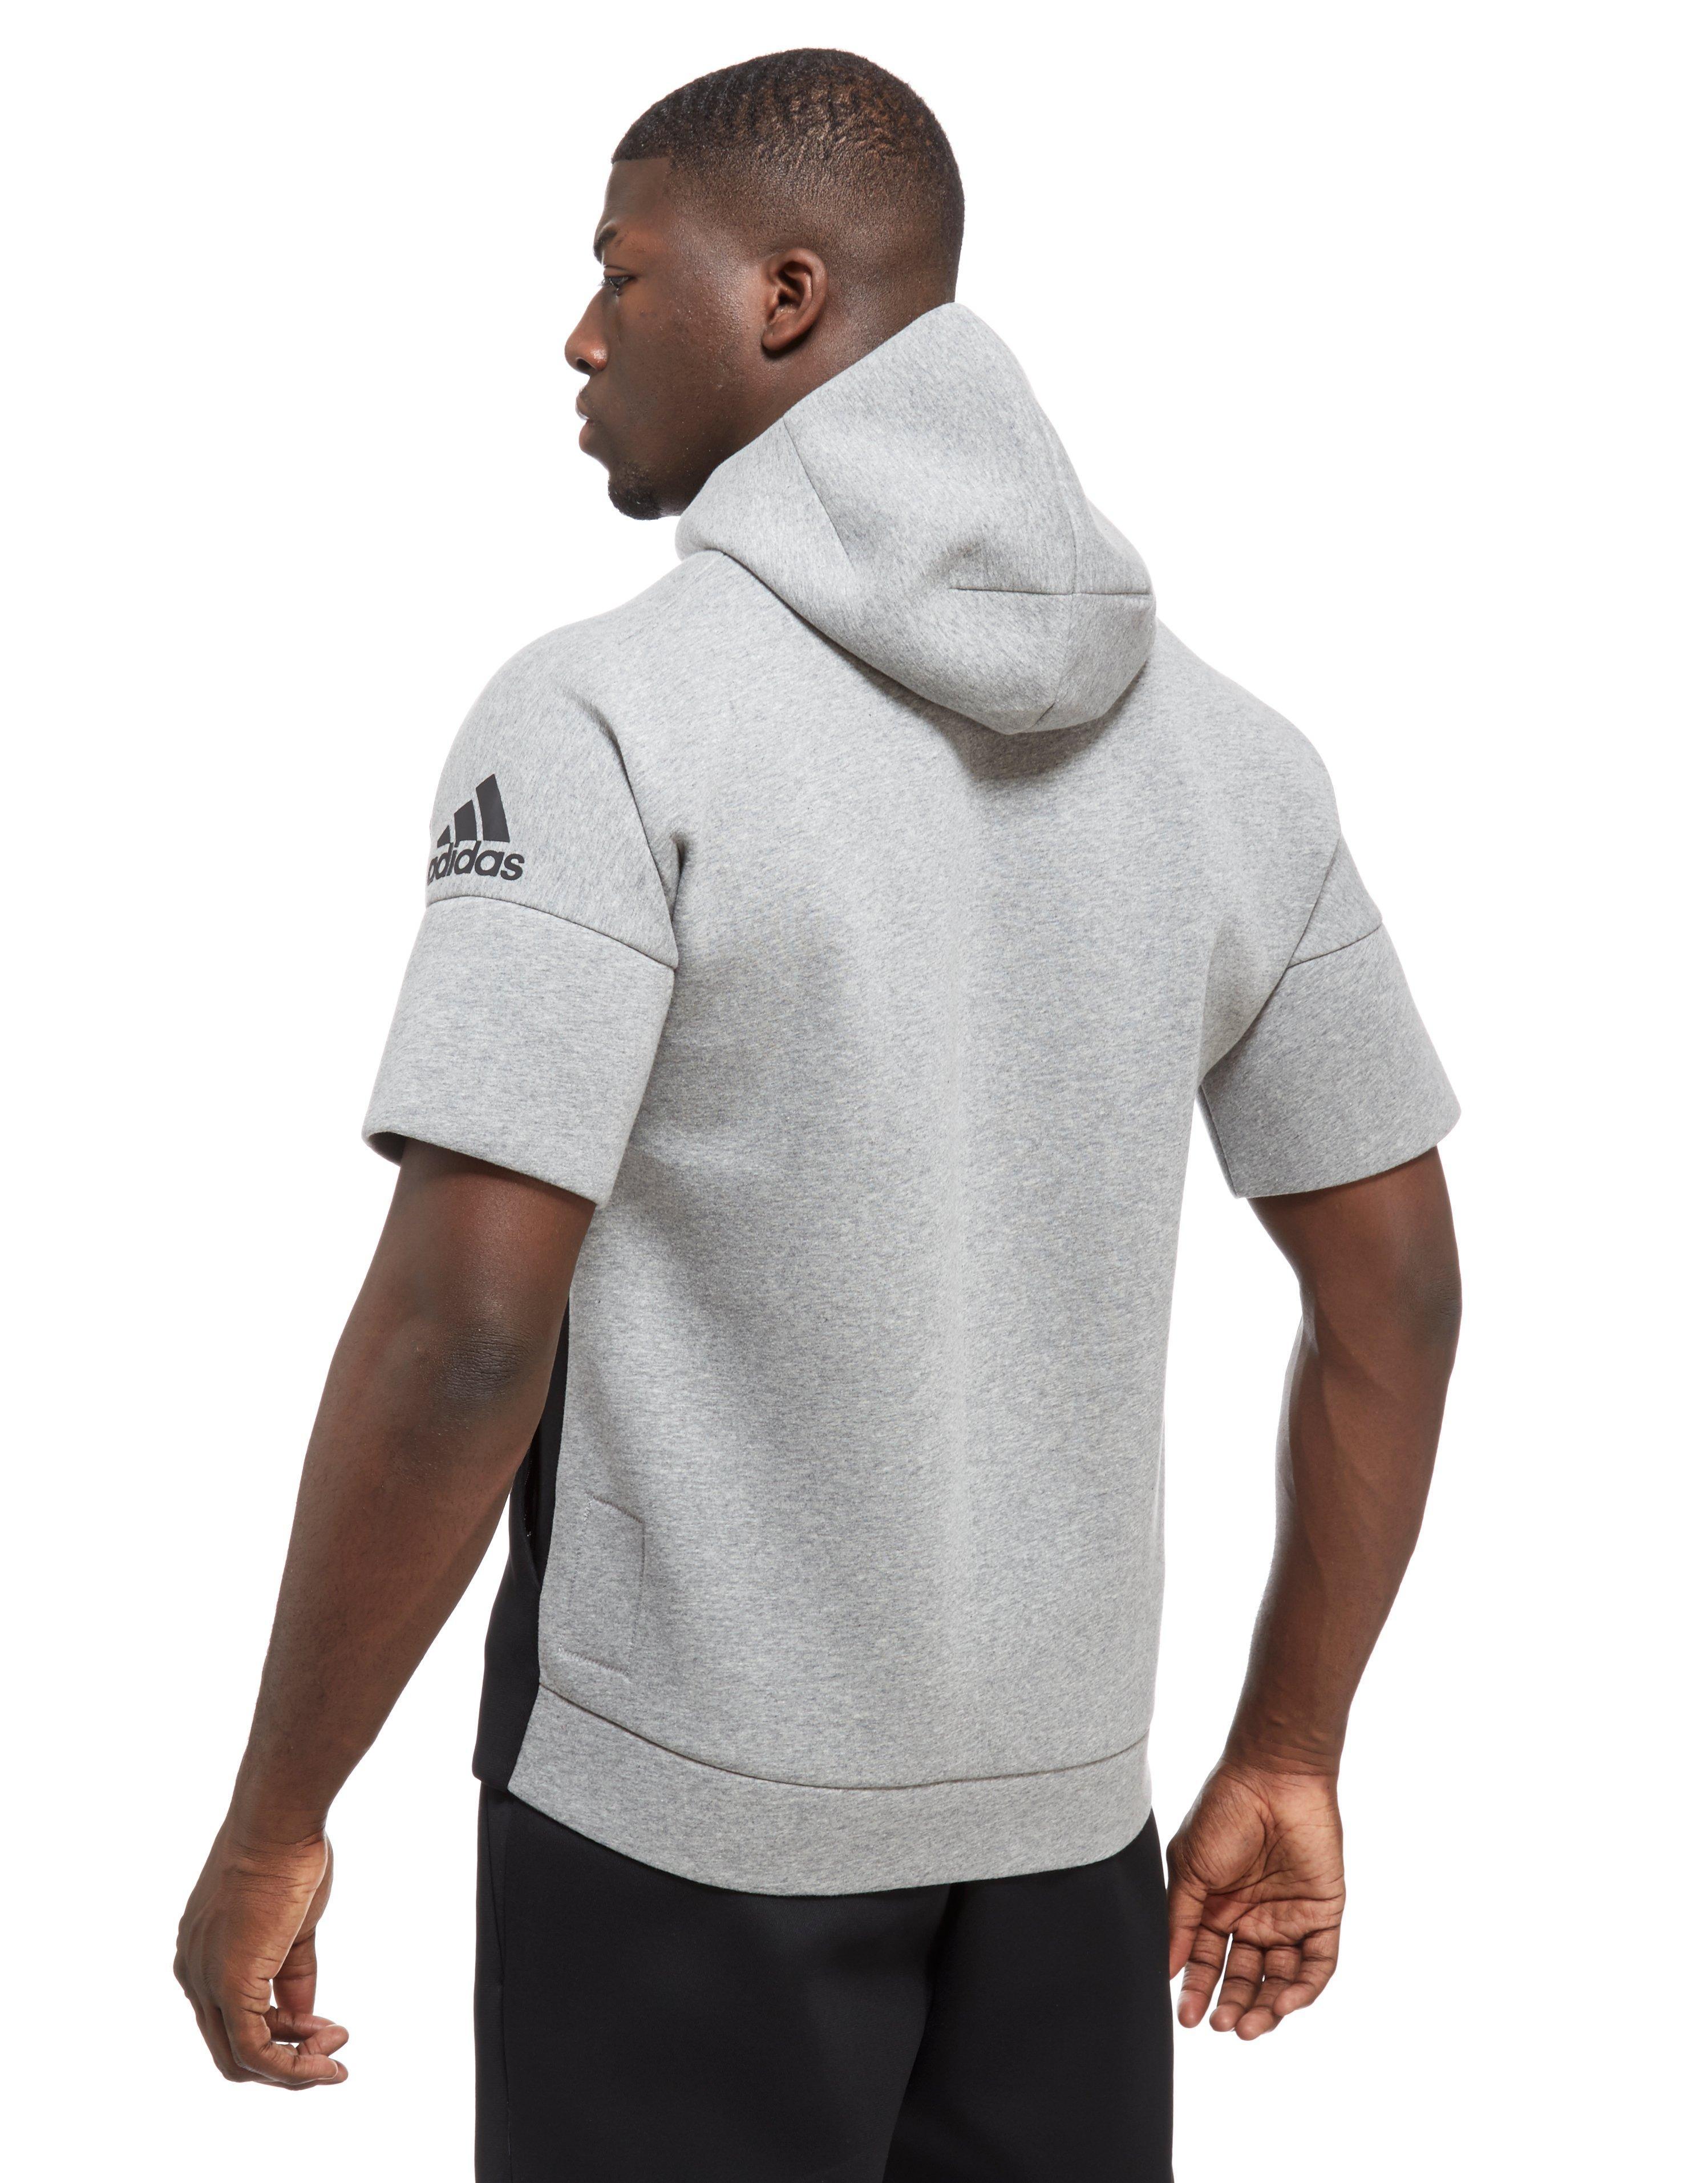 adidas Cotton Z.n.e Short Sleeve Hoodie in Black for Men - Lyst